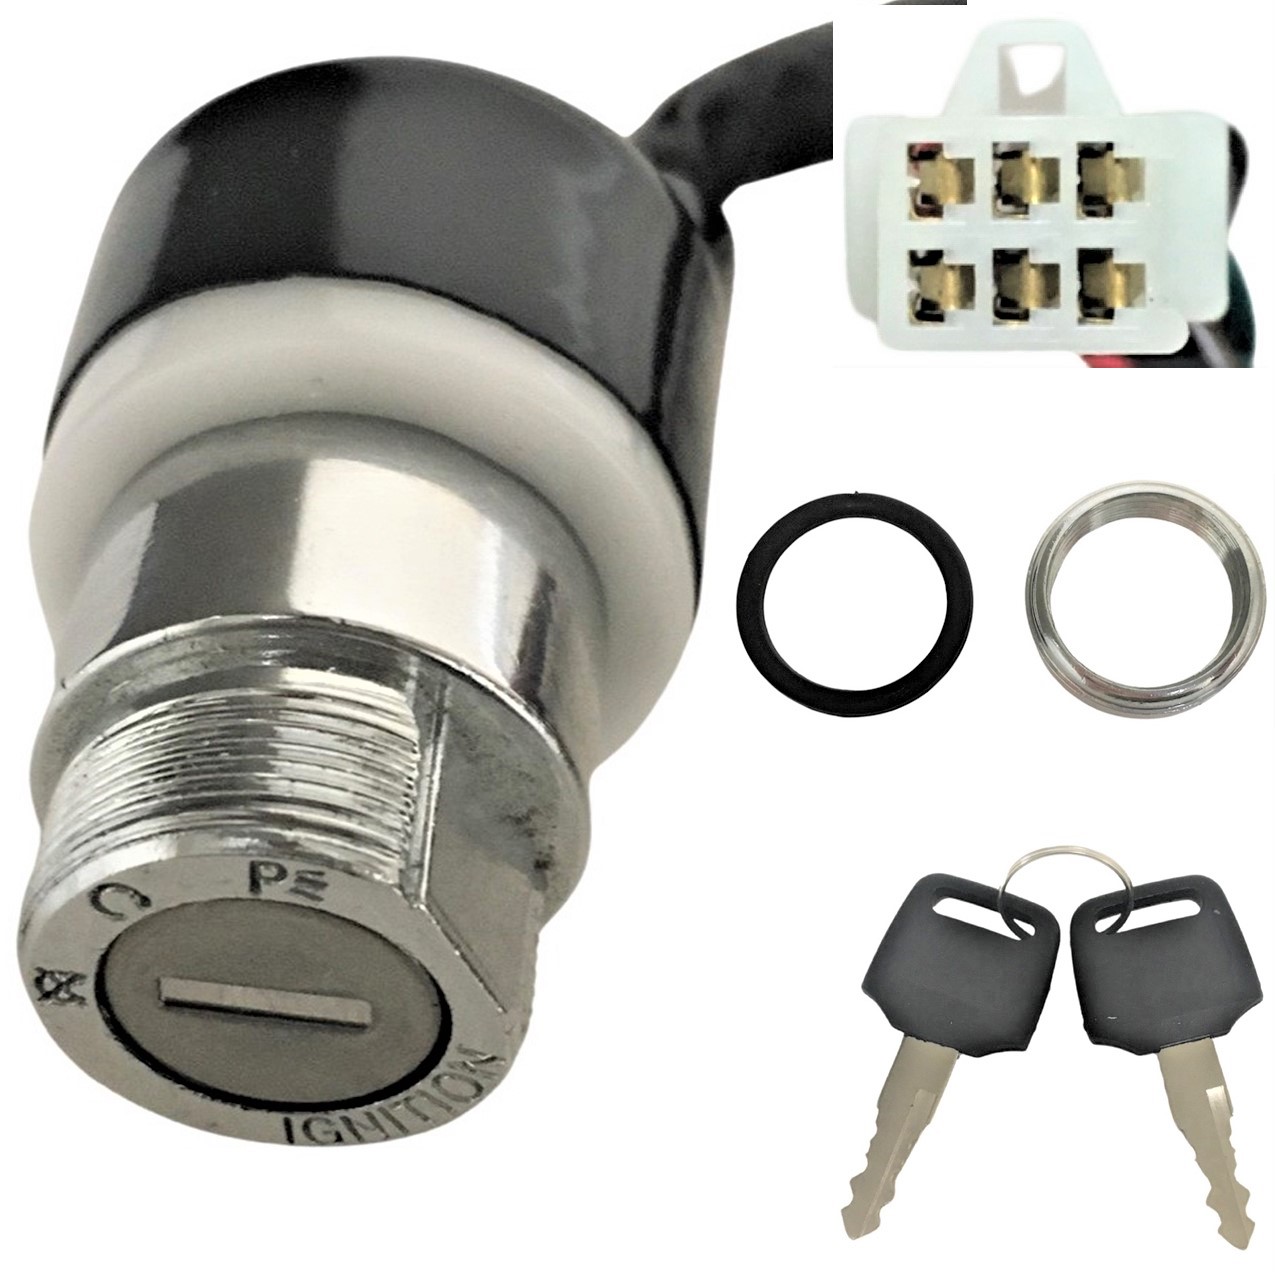 Ignition Switch Fits Many ATVs, Dirtbikes, GoKarts 6 Pins in 6 Pin Male Jack - Click Image to Close